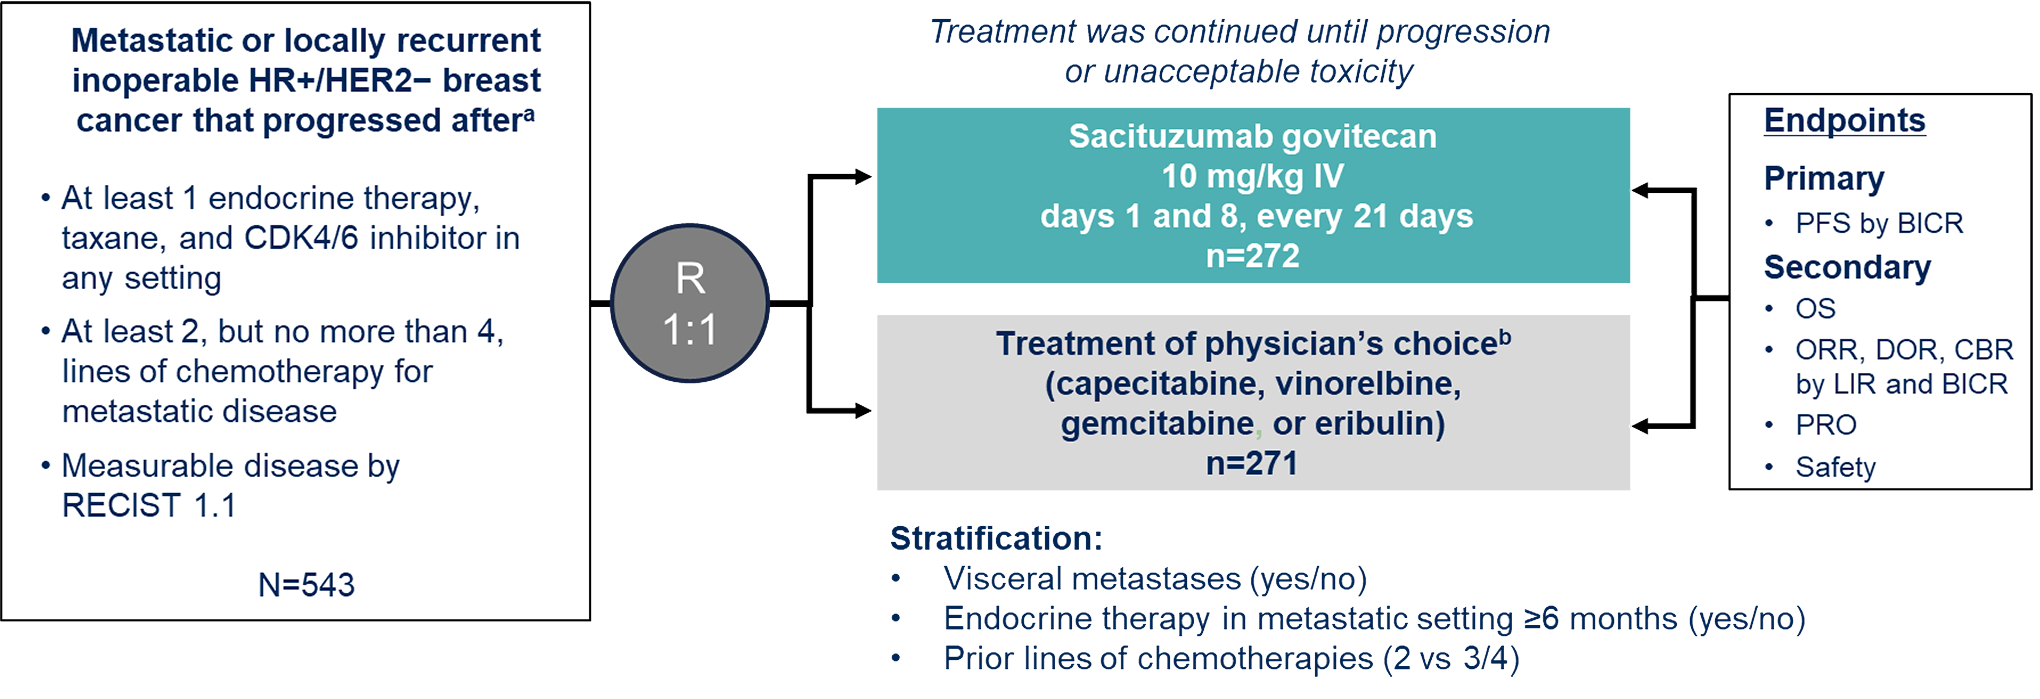 Describes the flow of patients through the TROPiCS-02 trial, from screening against the inclusion criteria to randomization to the end points until disease progression or unacceptable toxicity after the treatment period comparing sacituzumab govitecan 10 mg/kg administered by IV on days 1 and 8 every 21 days versus TPC (i.e., 1 of 4 capecitabine, vinorelbine, gemcitabine, or eribulin) to 543 patients with metastatic or locally recurrent, inoperable, HR-positive, HER2-negative BC after at least 1 endocrine therapy, taxane, and CDK4/6 inhibitor as well as at least 2, but not more than 4, lines of chemotherapy.